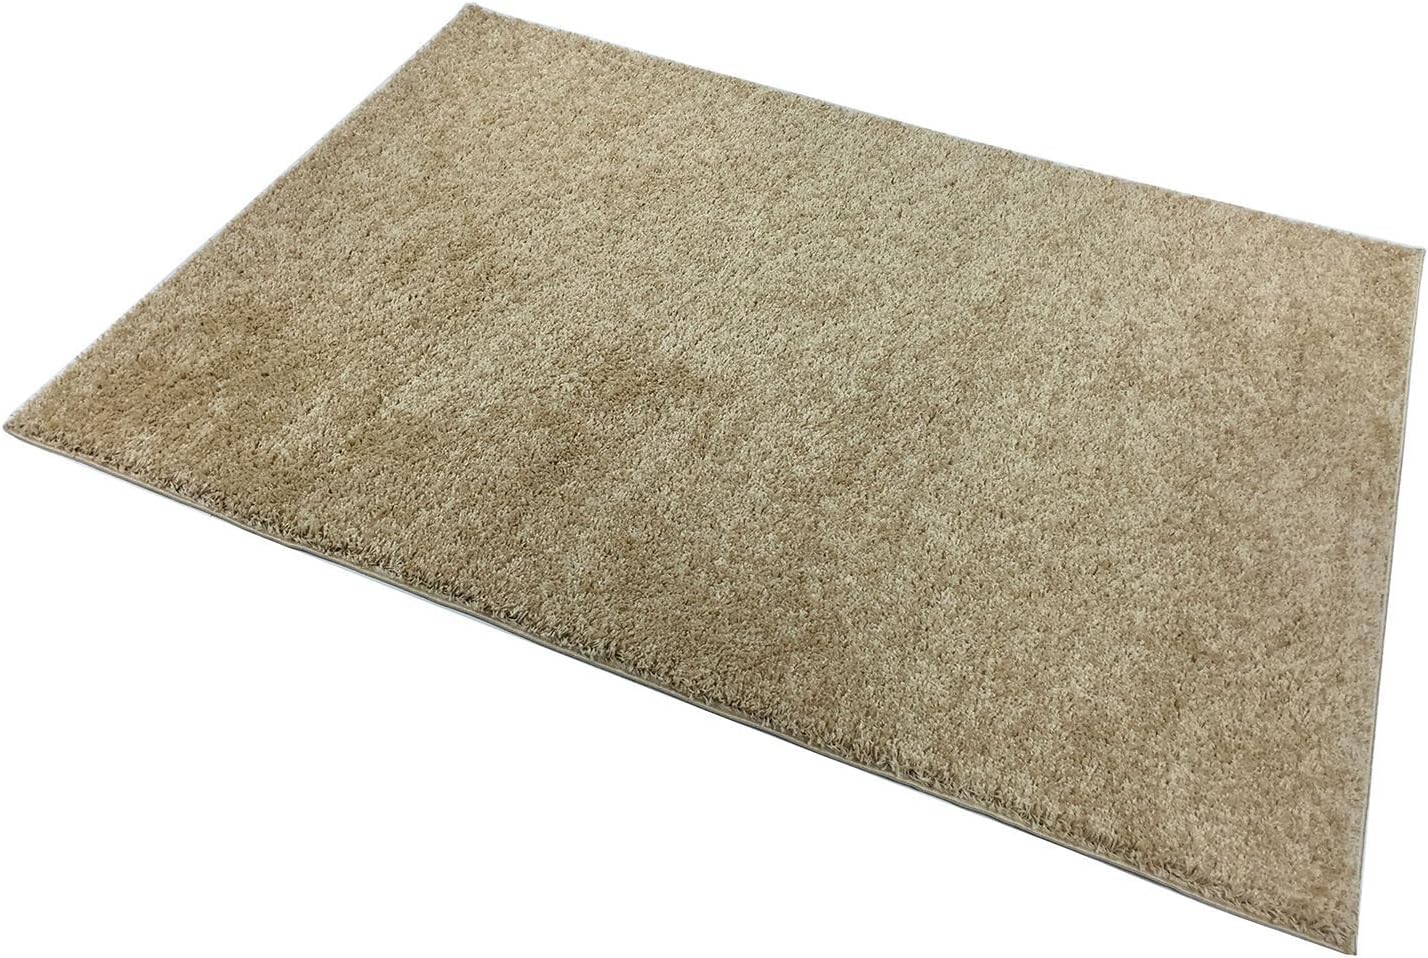 SOHO Shaggy Collection Solid Color Shag Area Rug (Beige, 8 x 10)-2